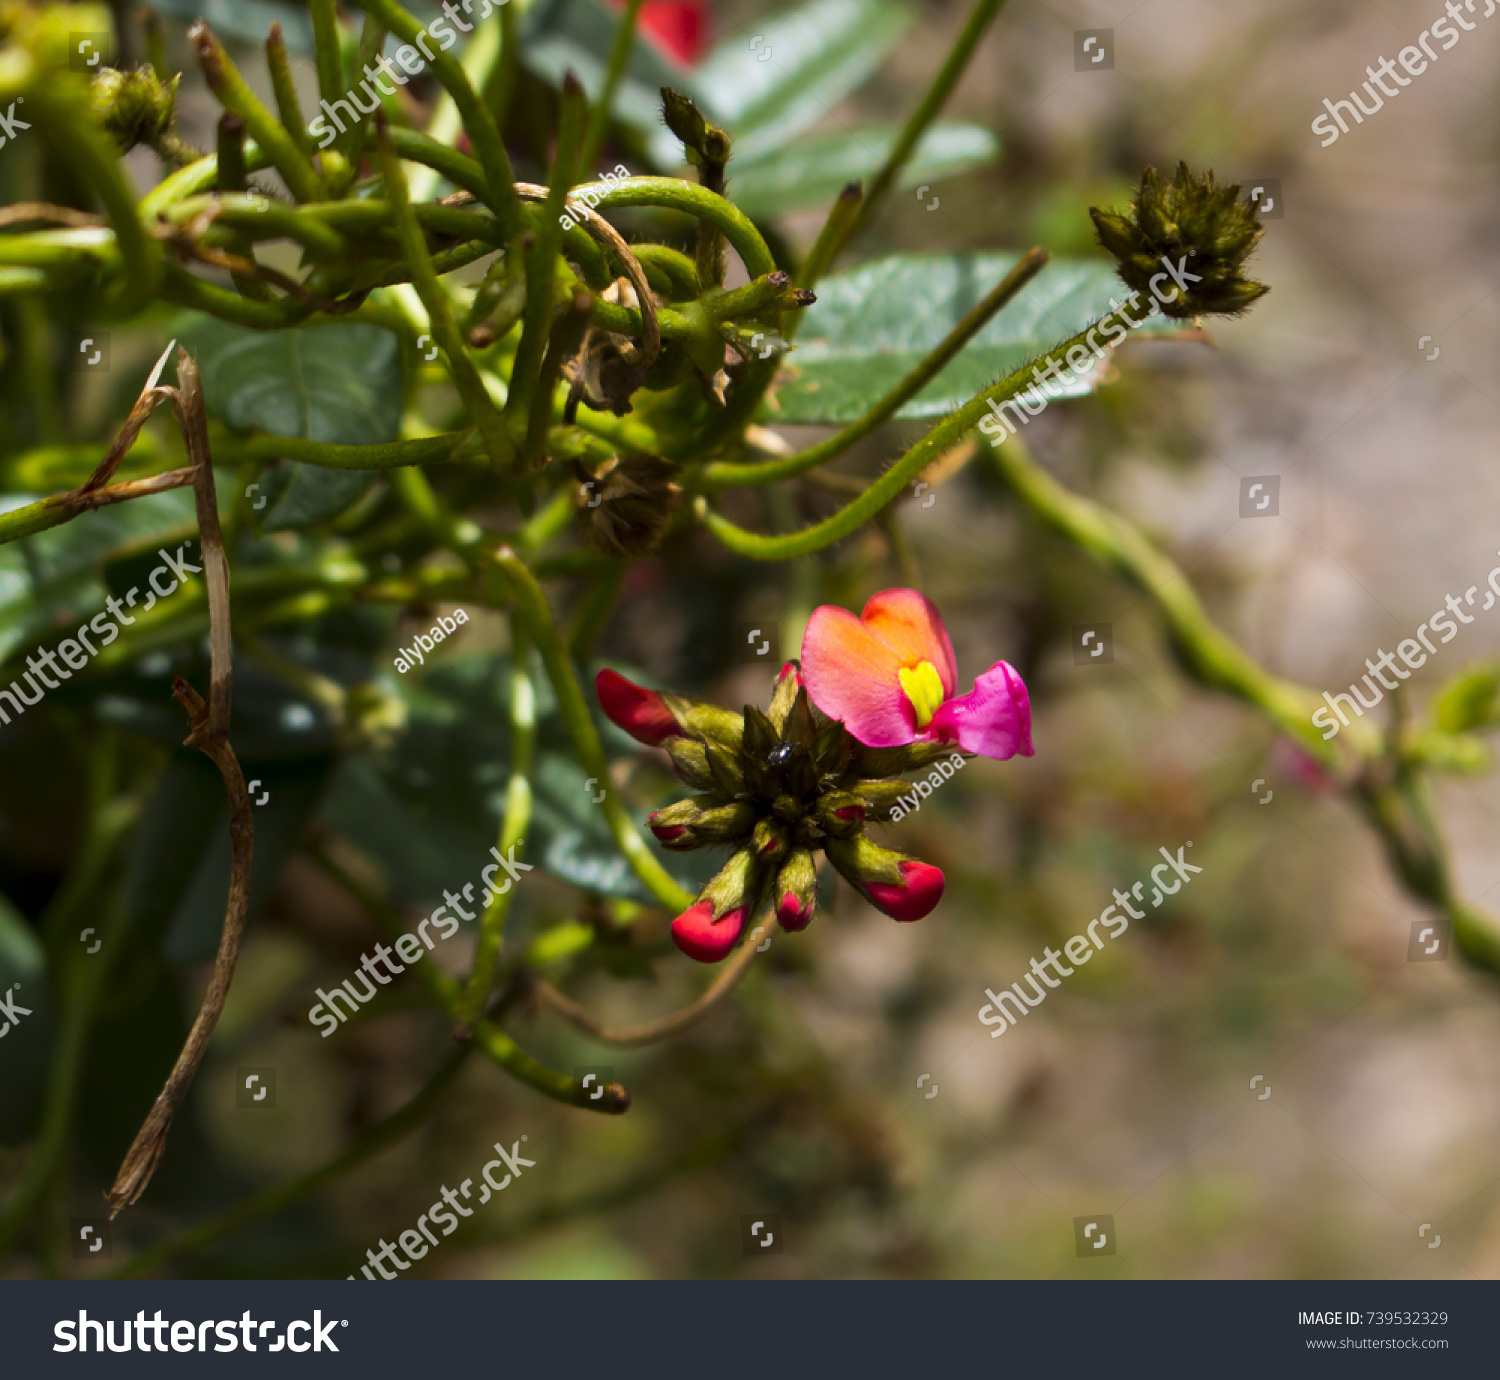 Kennedia Coccinea Coral Vine Species Flowering Nature Stock Image 739532329